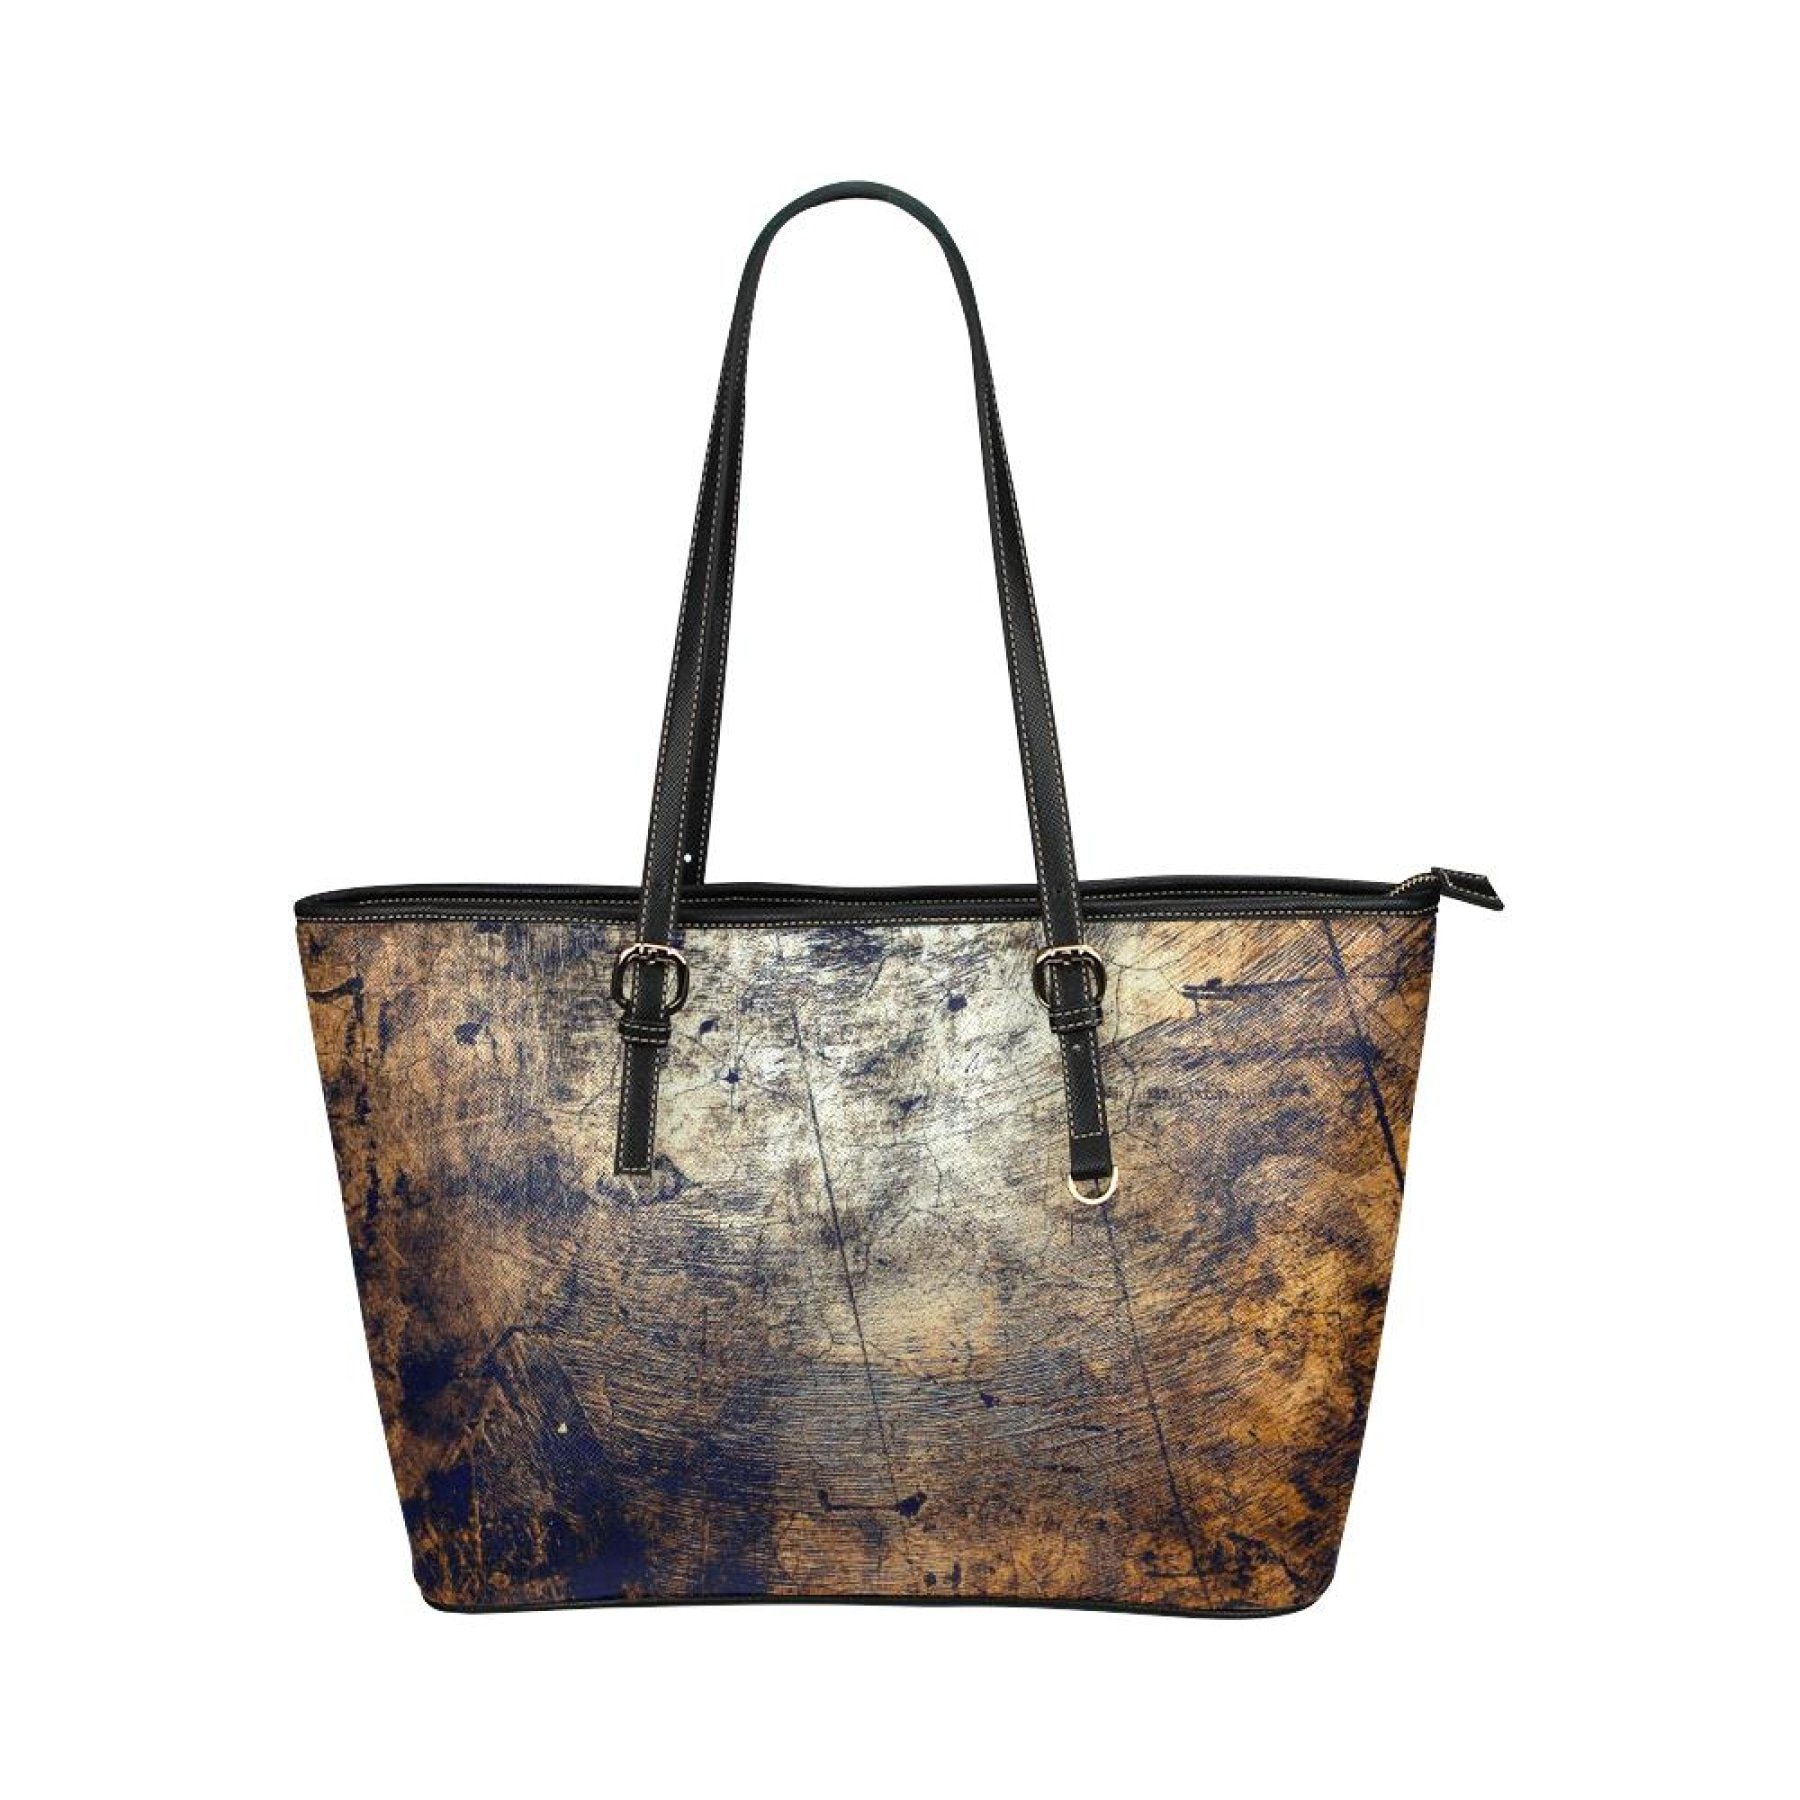 Brown Tote Shoulder Bag With Abstract Grunge Design 20